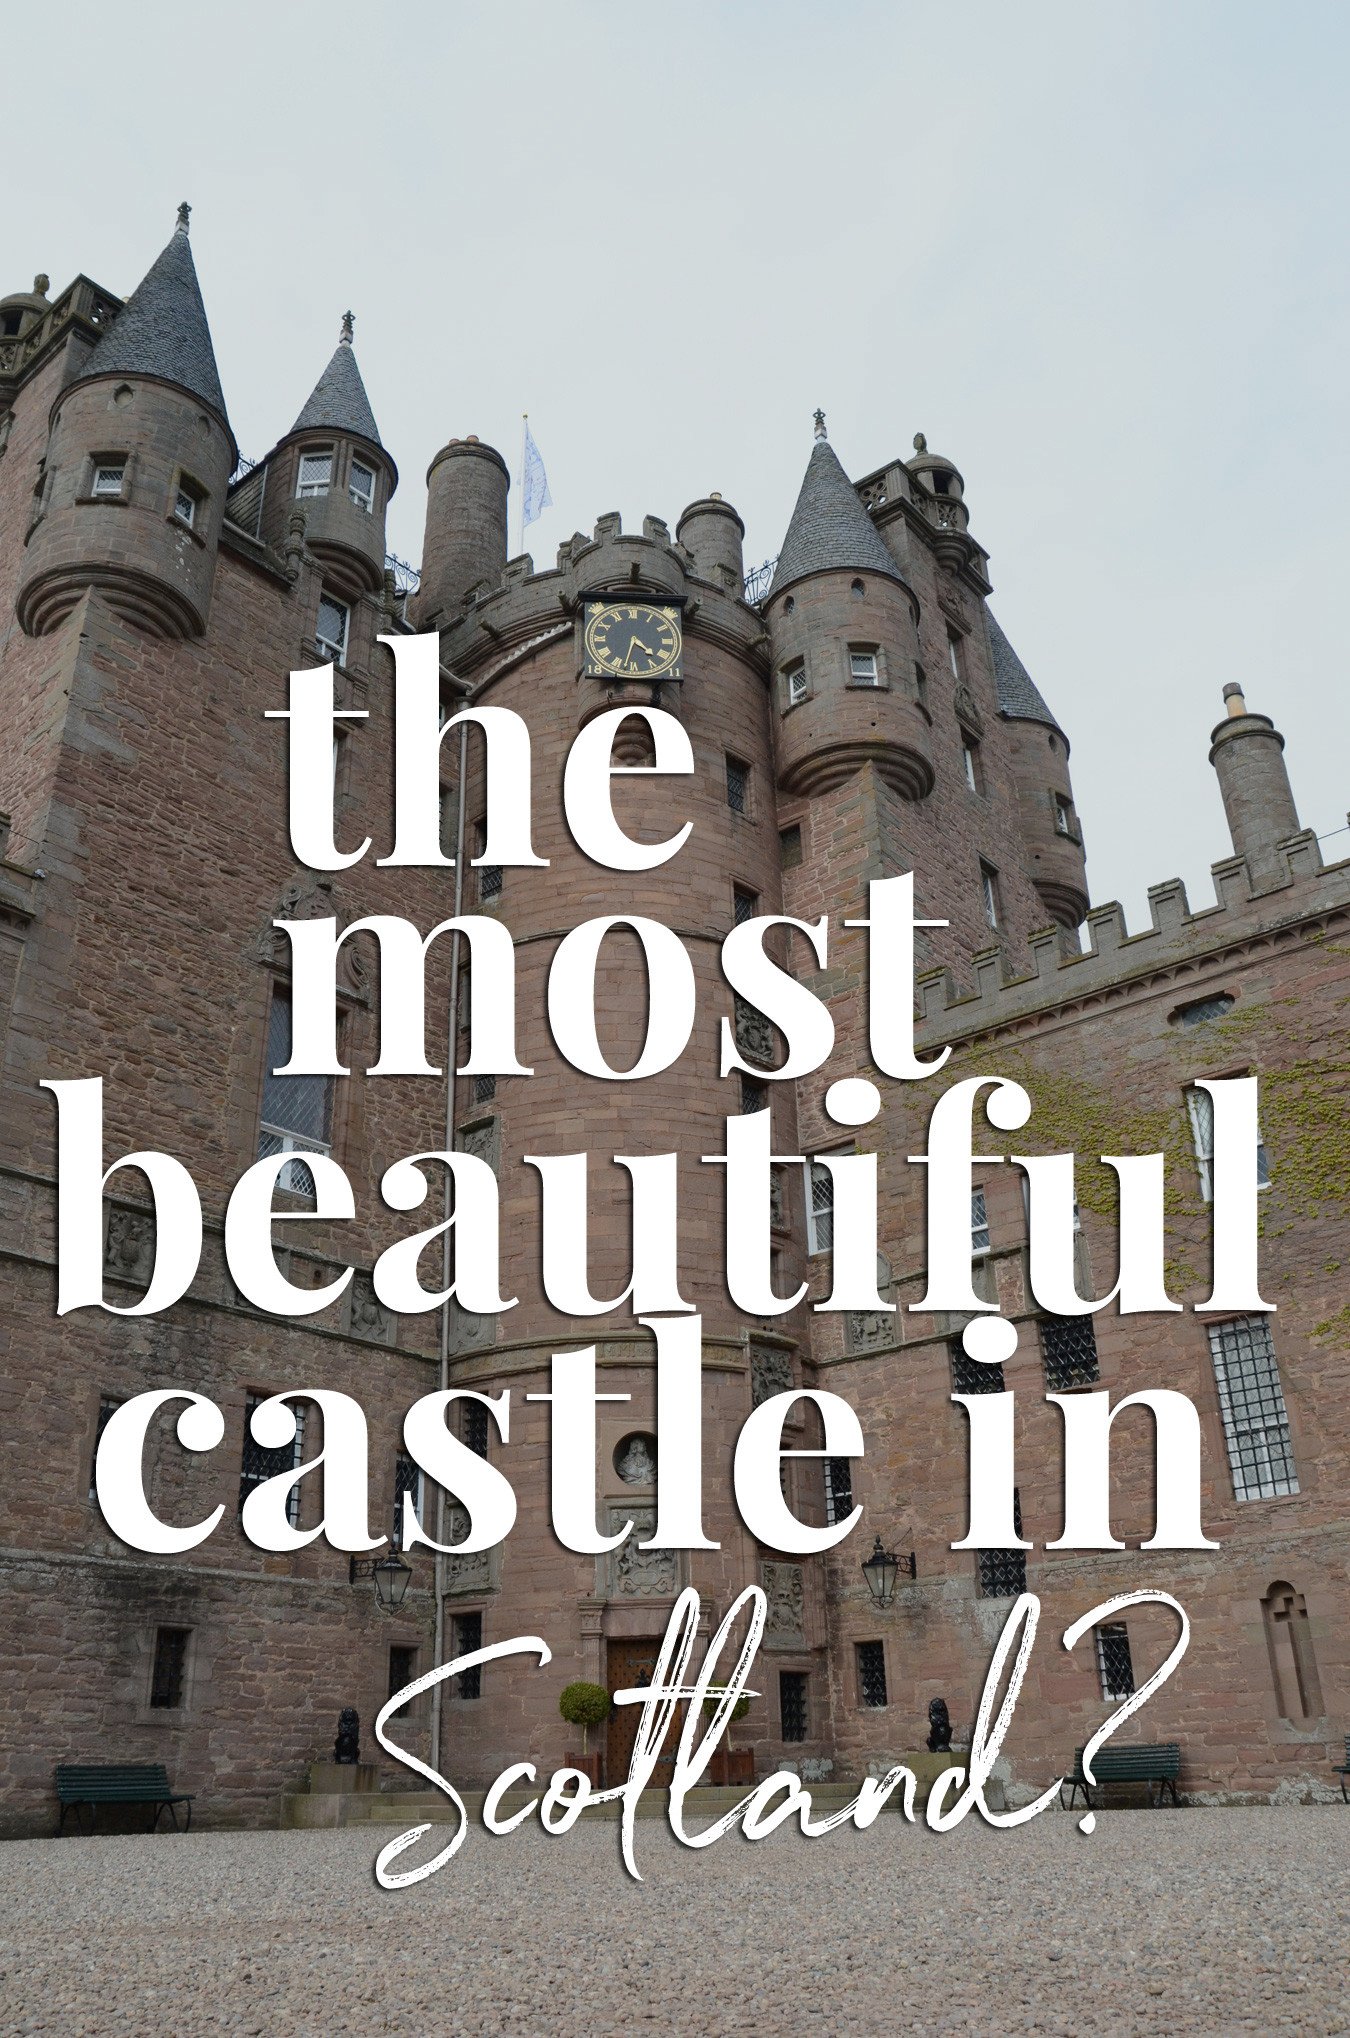 Is this the most beautiful castle in Scotland?